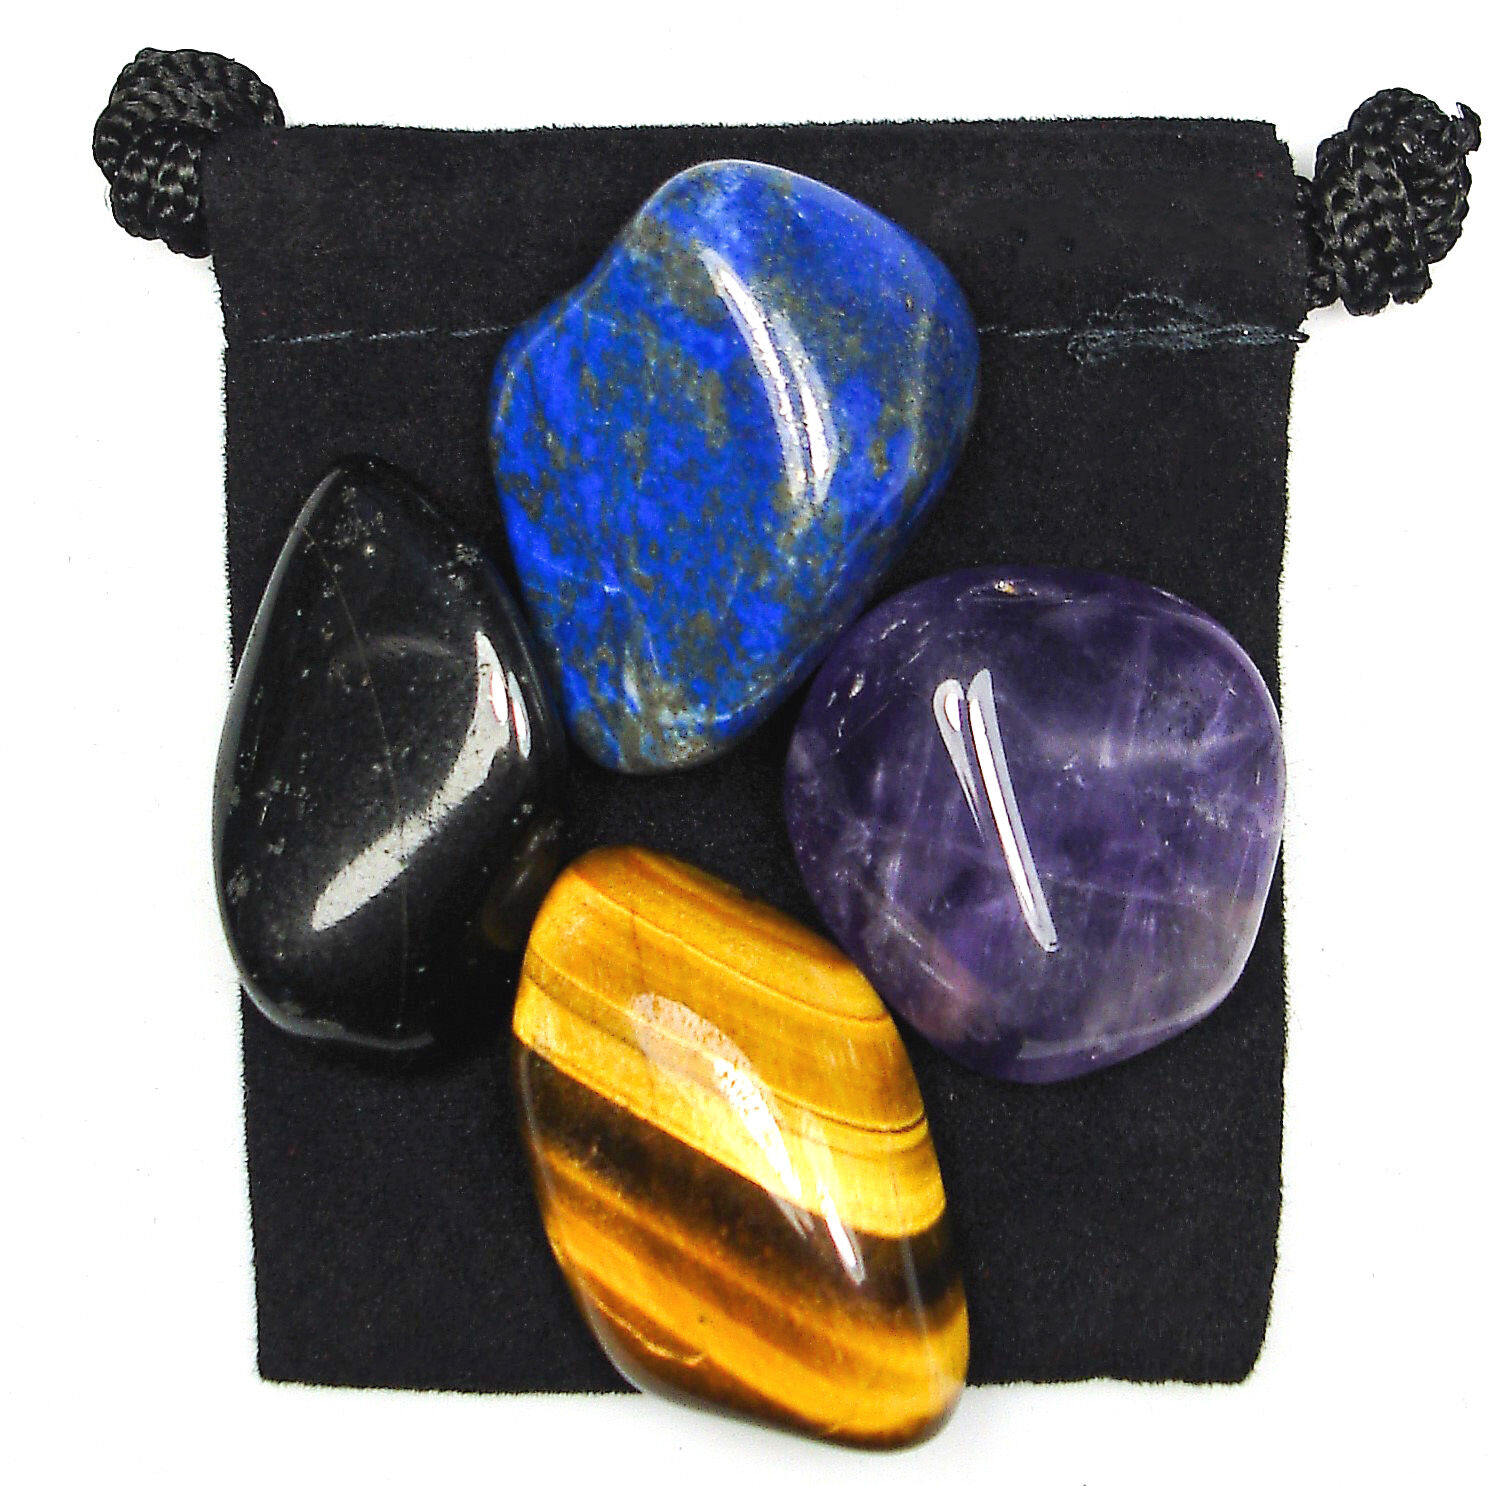 PSYCHIC ATTACK BLOCKER Tumbled Crystal Healing Set = 4 Gemstones + Pouch + Card